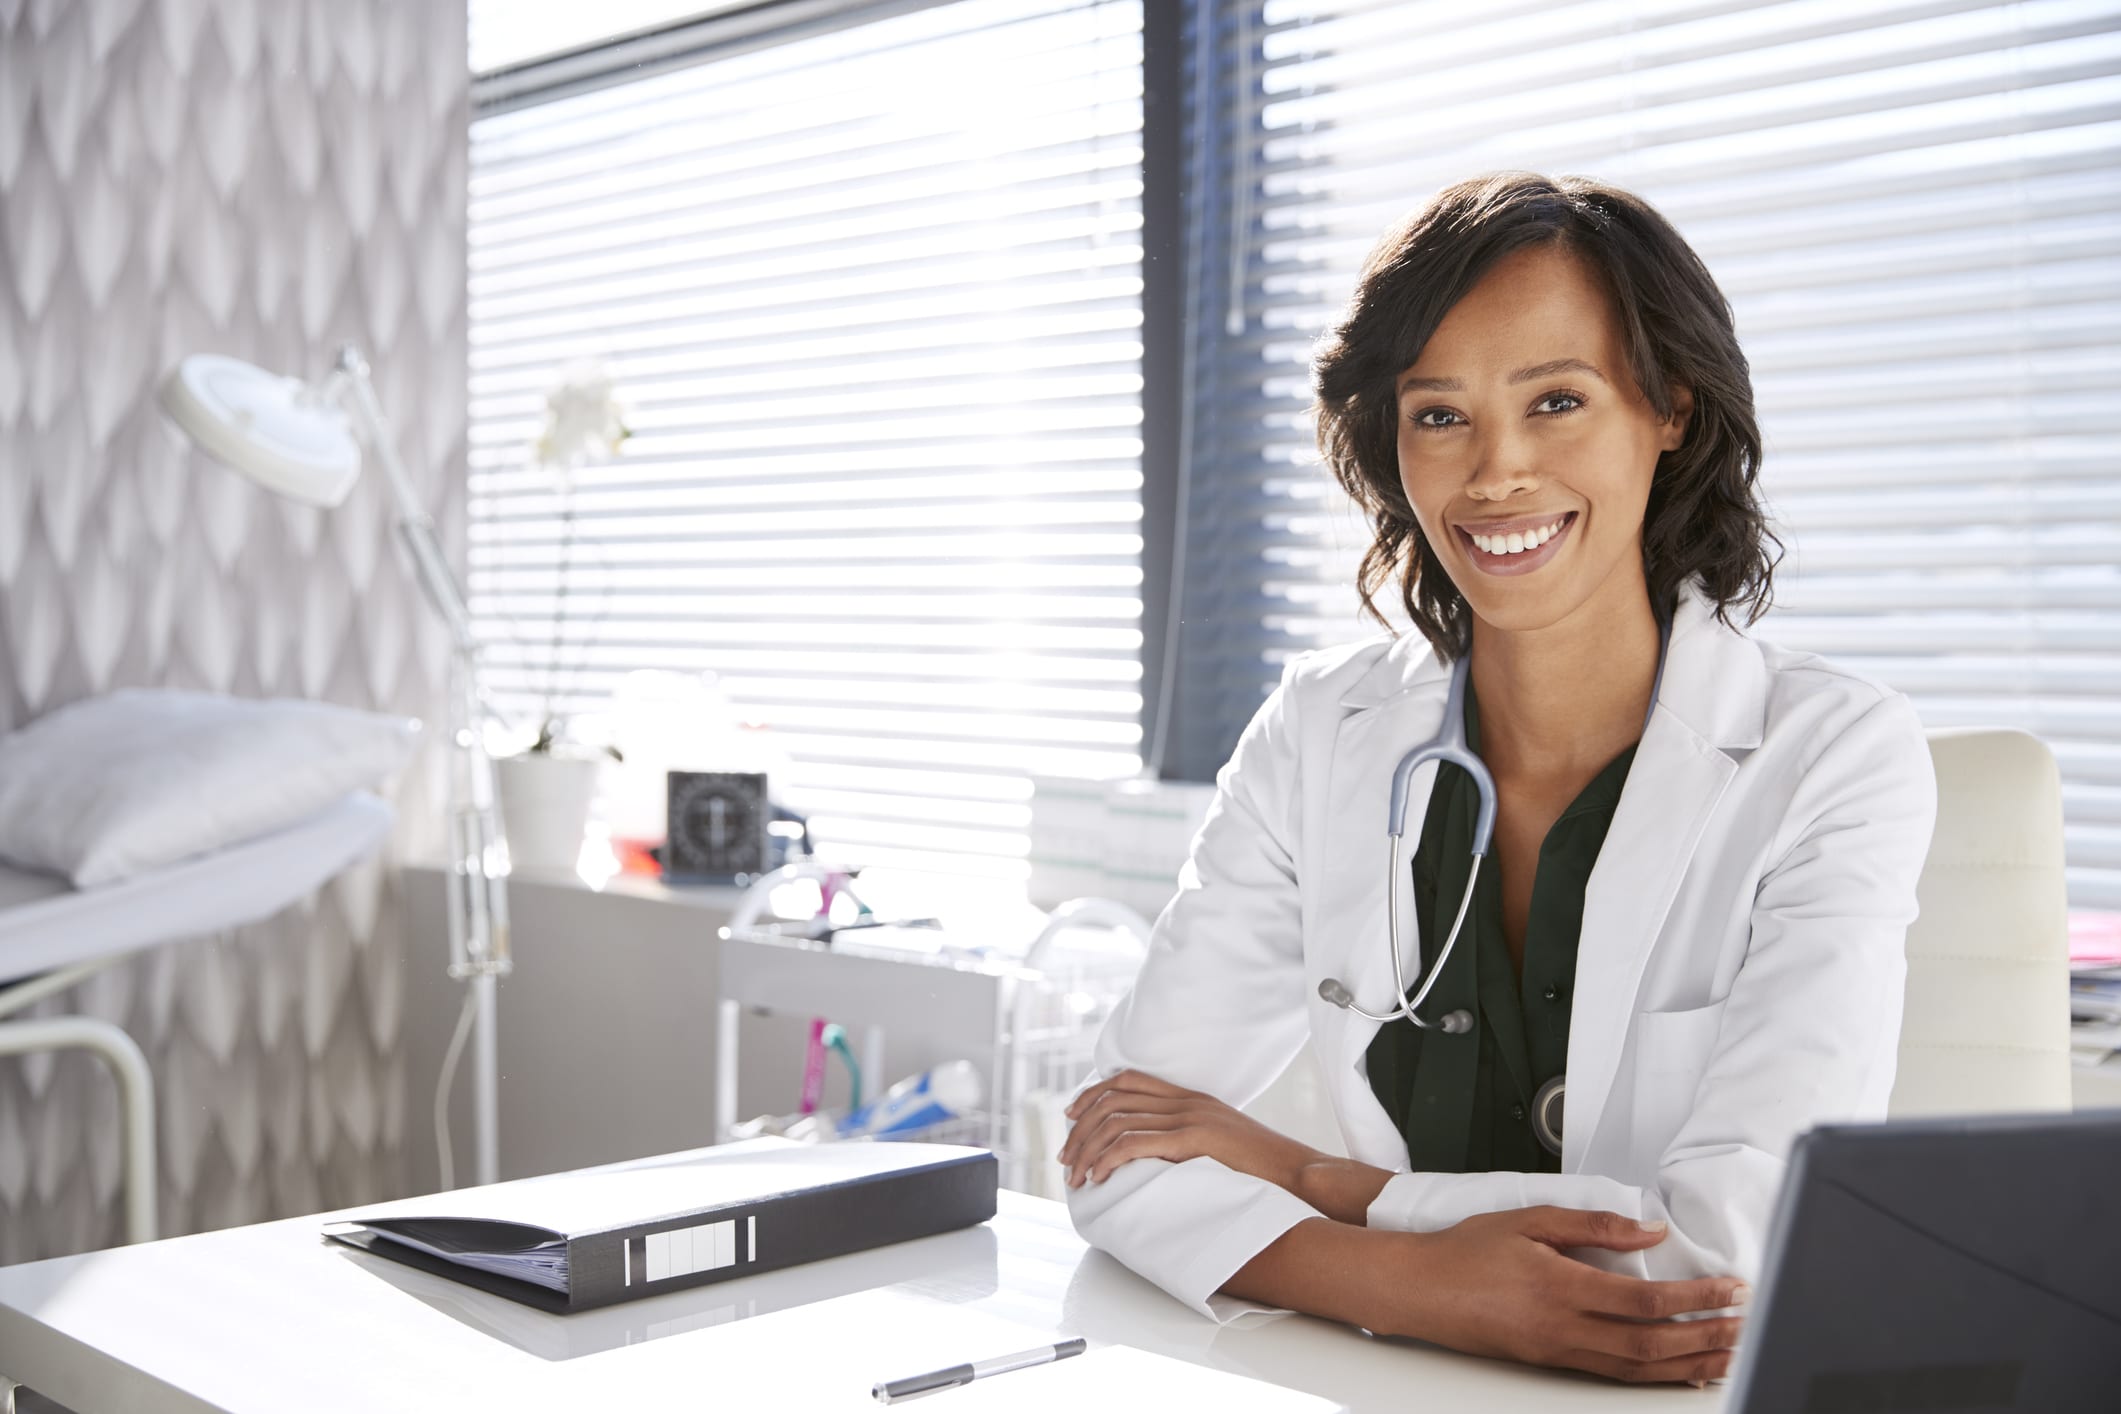 Portrait Of Smiling Female Doctor Wearing White Coat With Stethoscope Sitting Behind Desk In Office